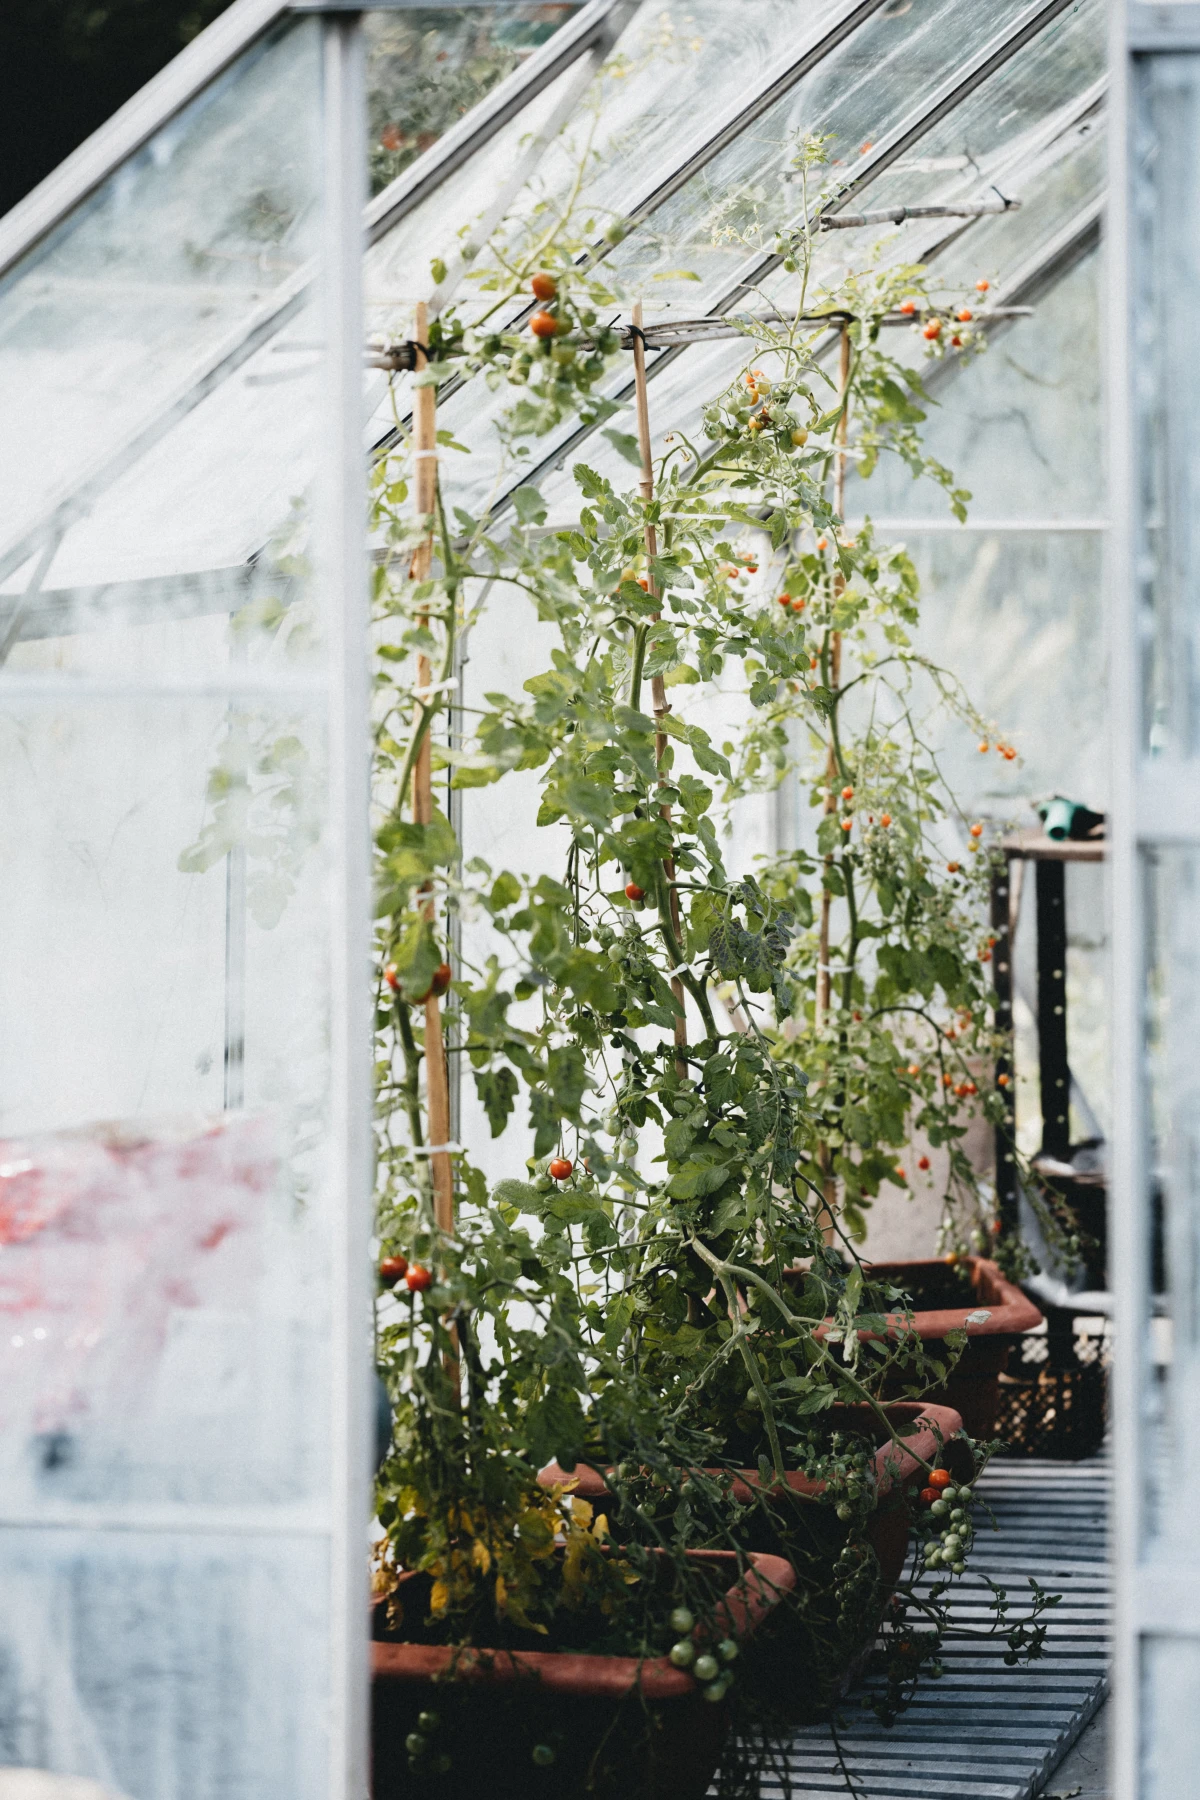 growing tomatoes in a greenhouse